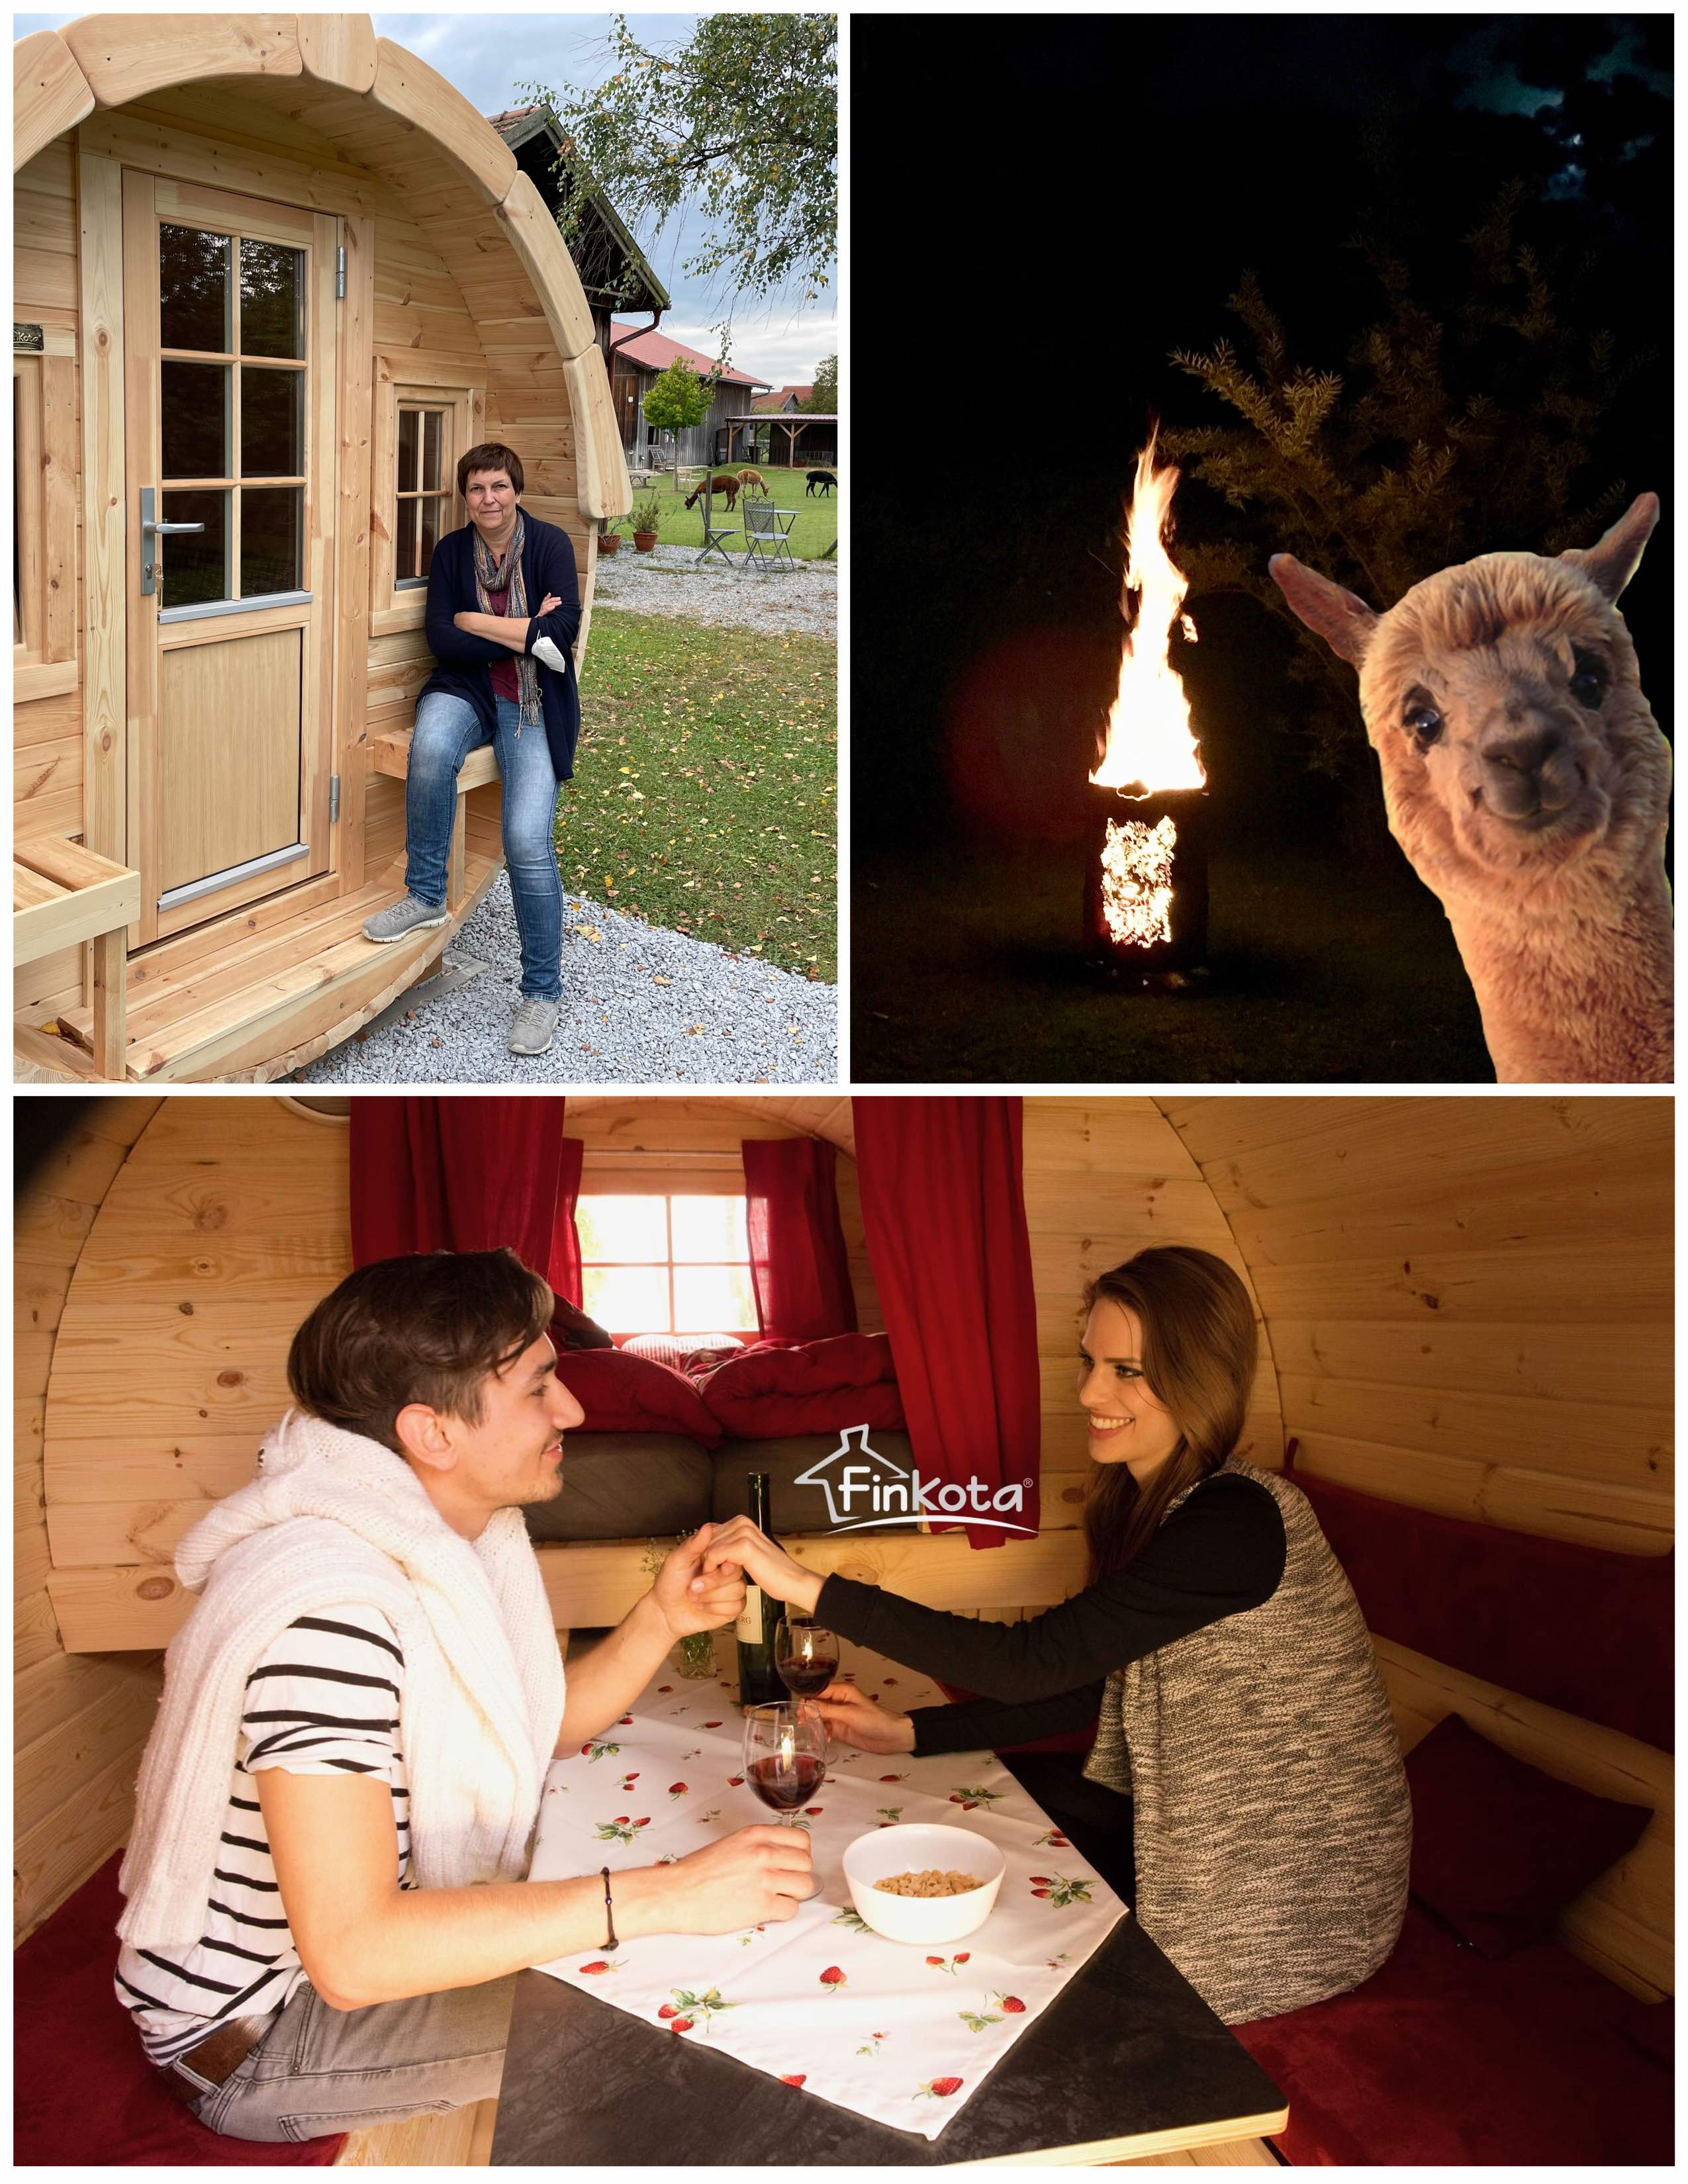 Collage Campingfass